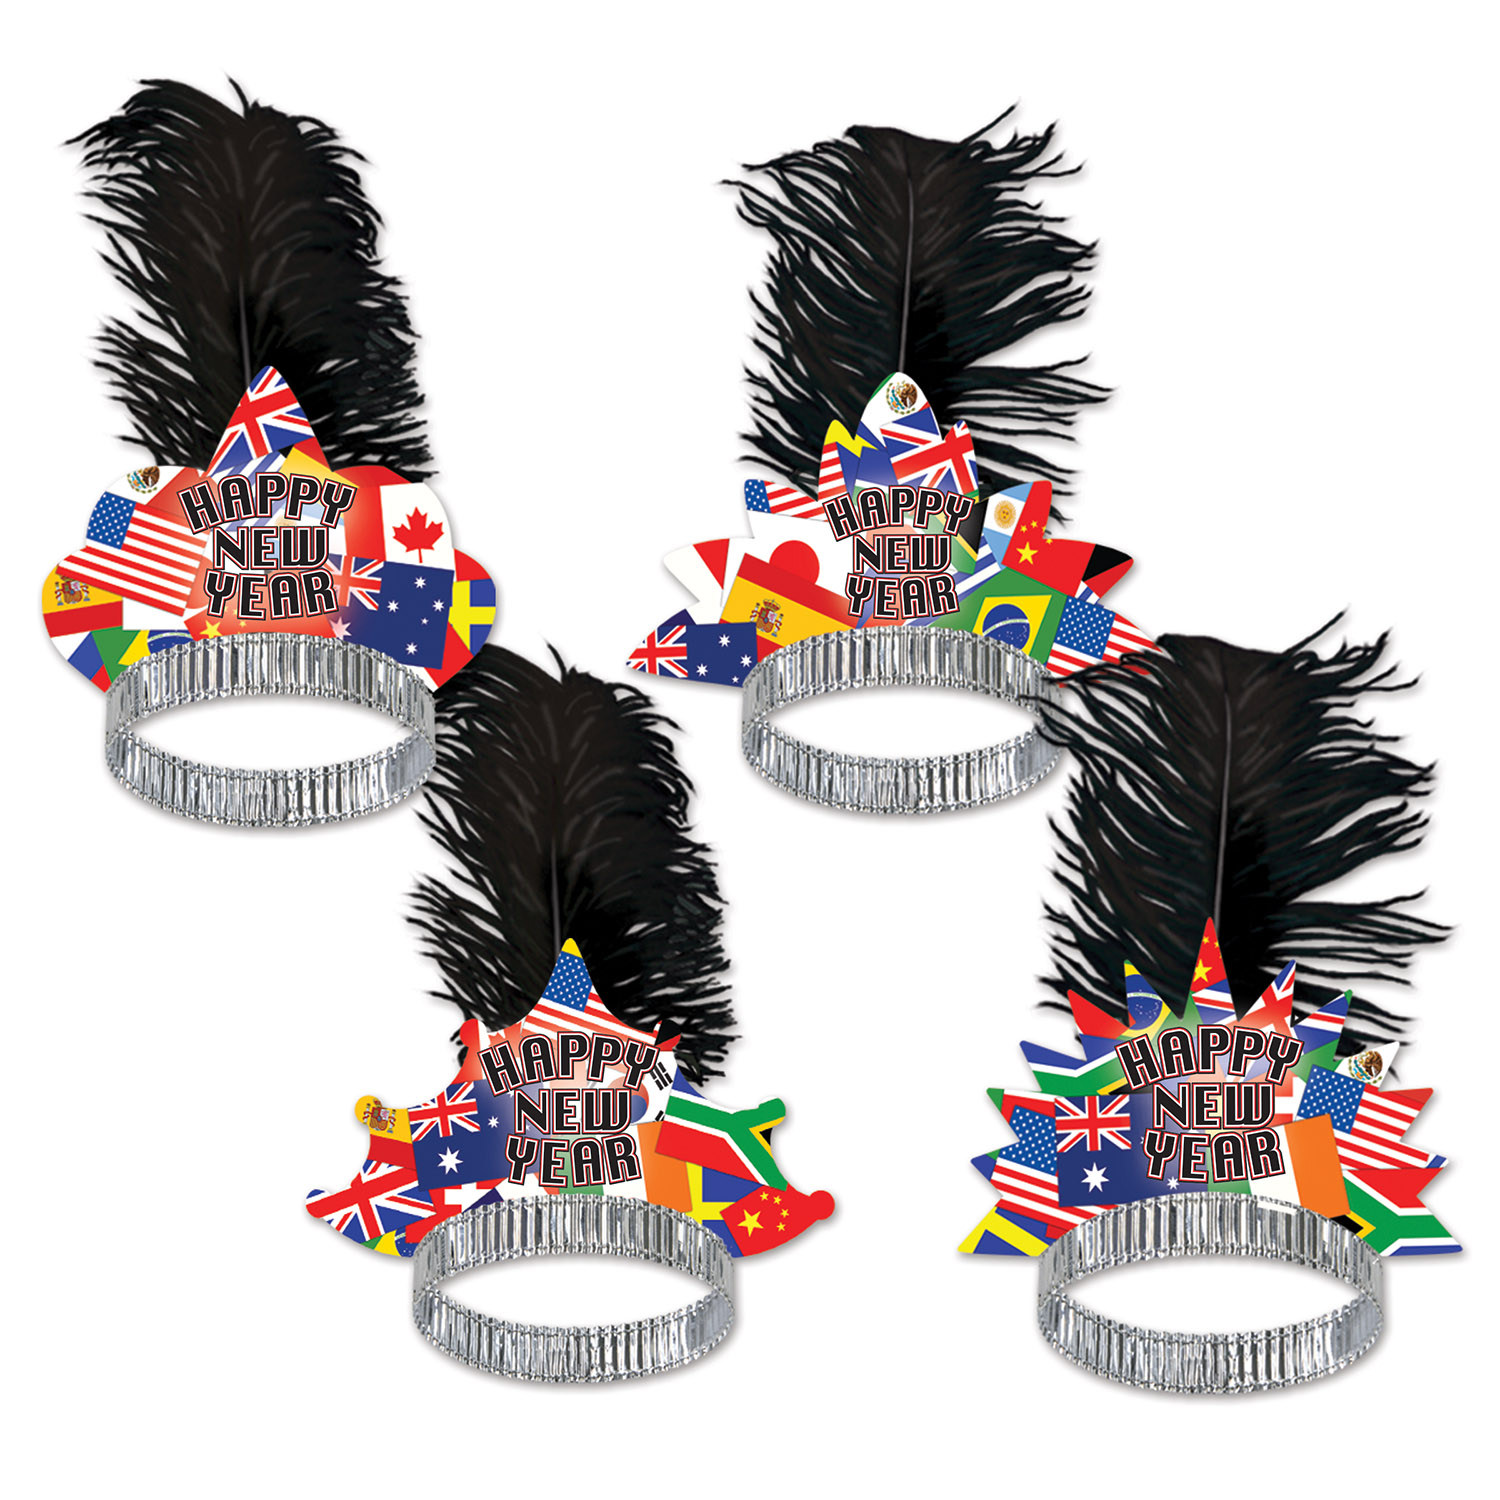 Four different tiara shaped tops printed with international flags with the words "Happy New Year" and a black plume.